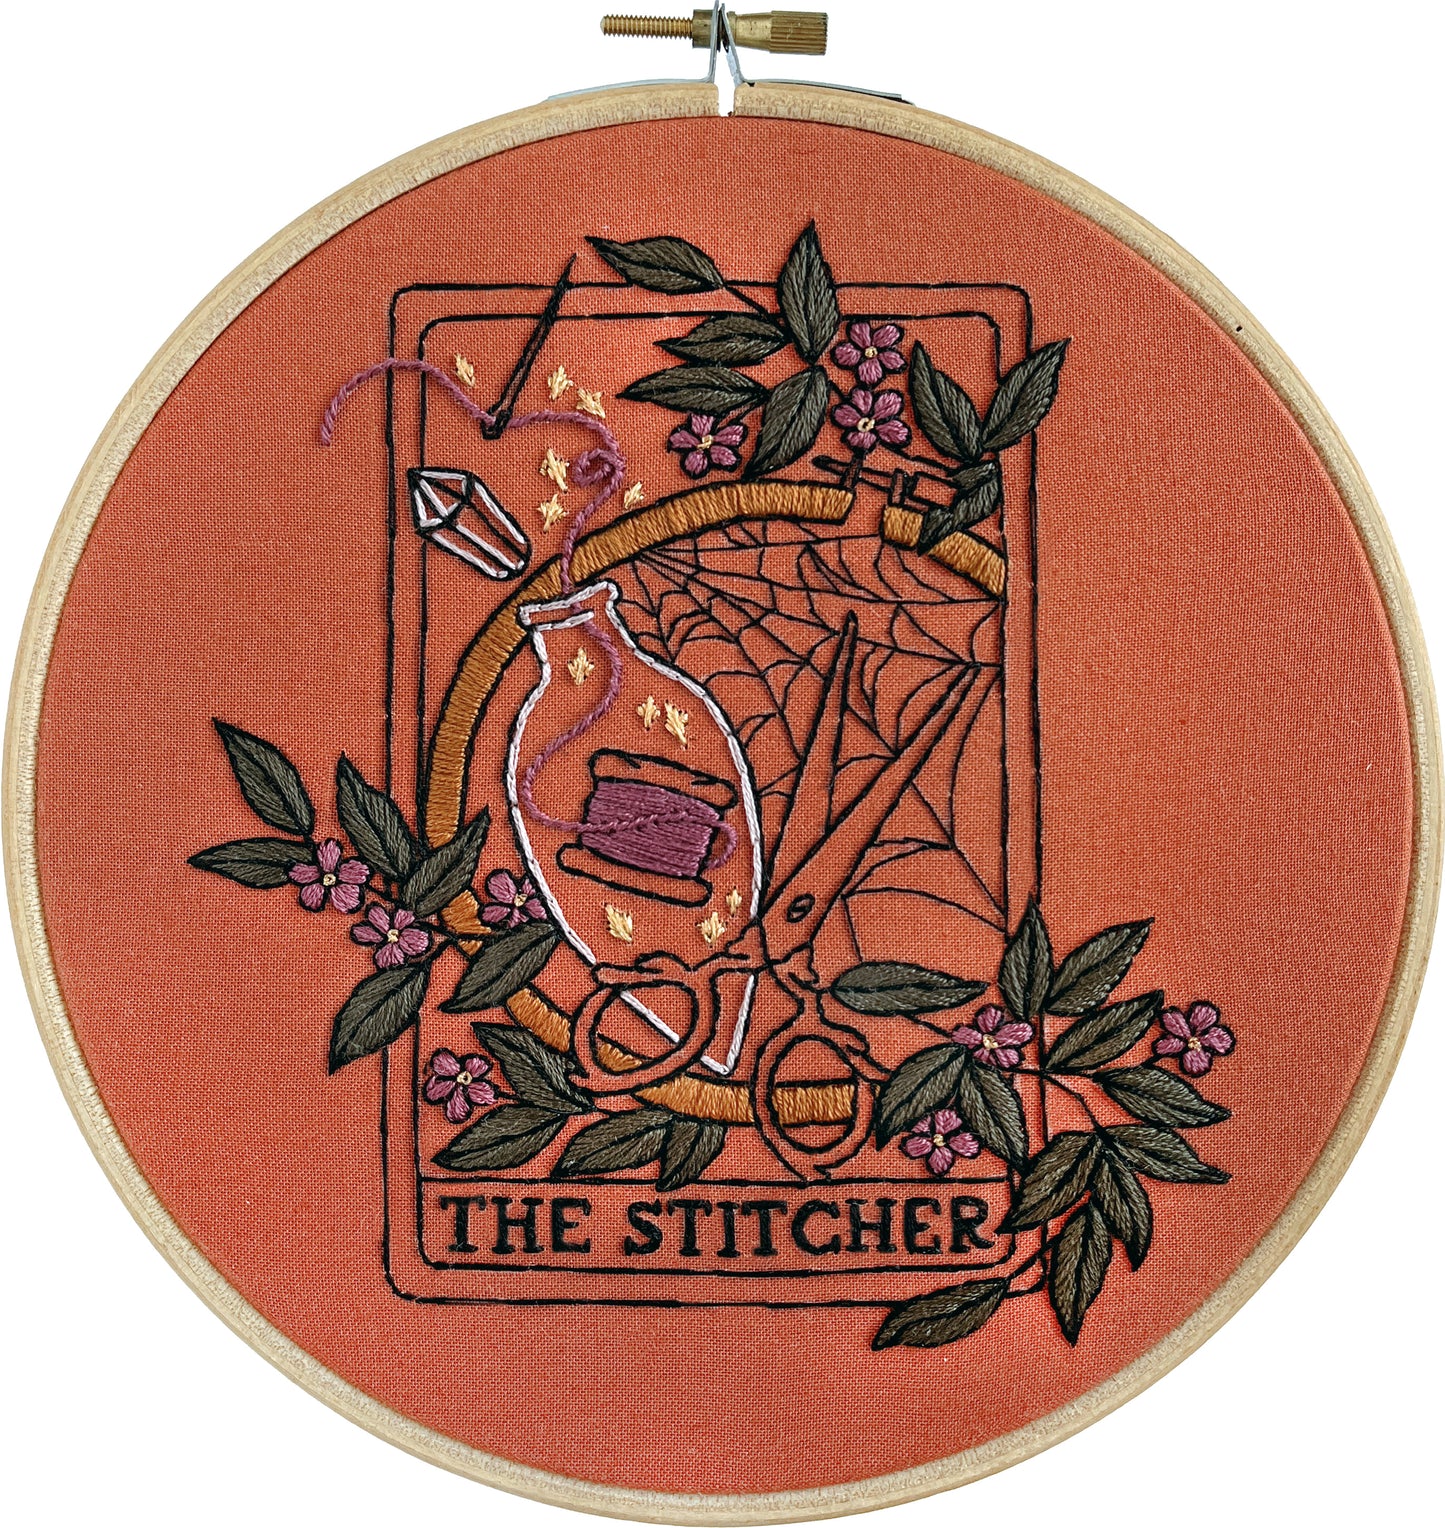 Printed Fabric Only - The Stitcher - 7" Hoop